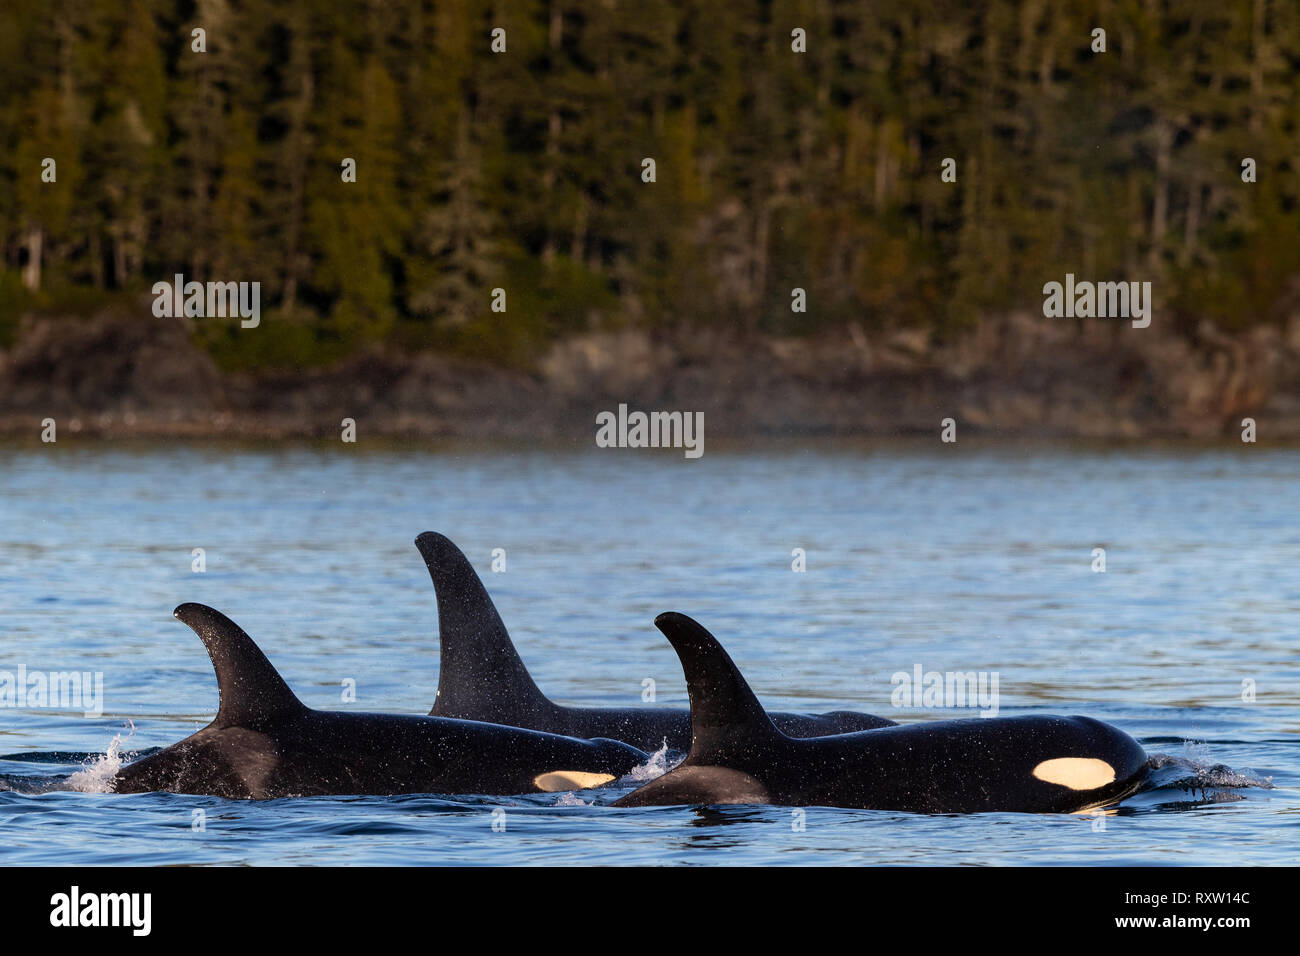 Northern resident killer whales resting along the hanson island shoreline near the Broughton Archipelago, First Nations Territory, British Columbia, Canada Stock Photo